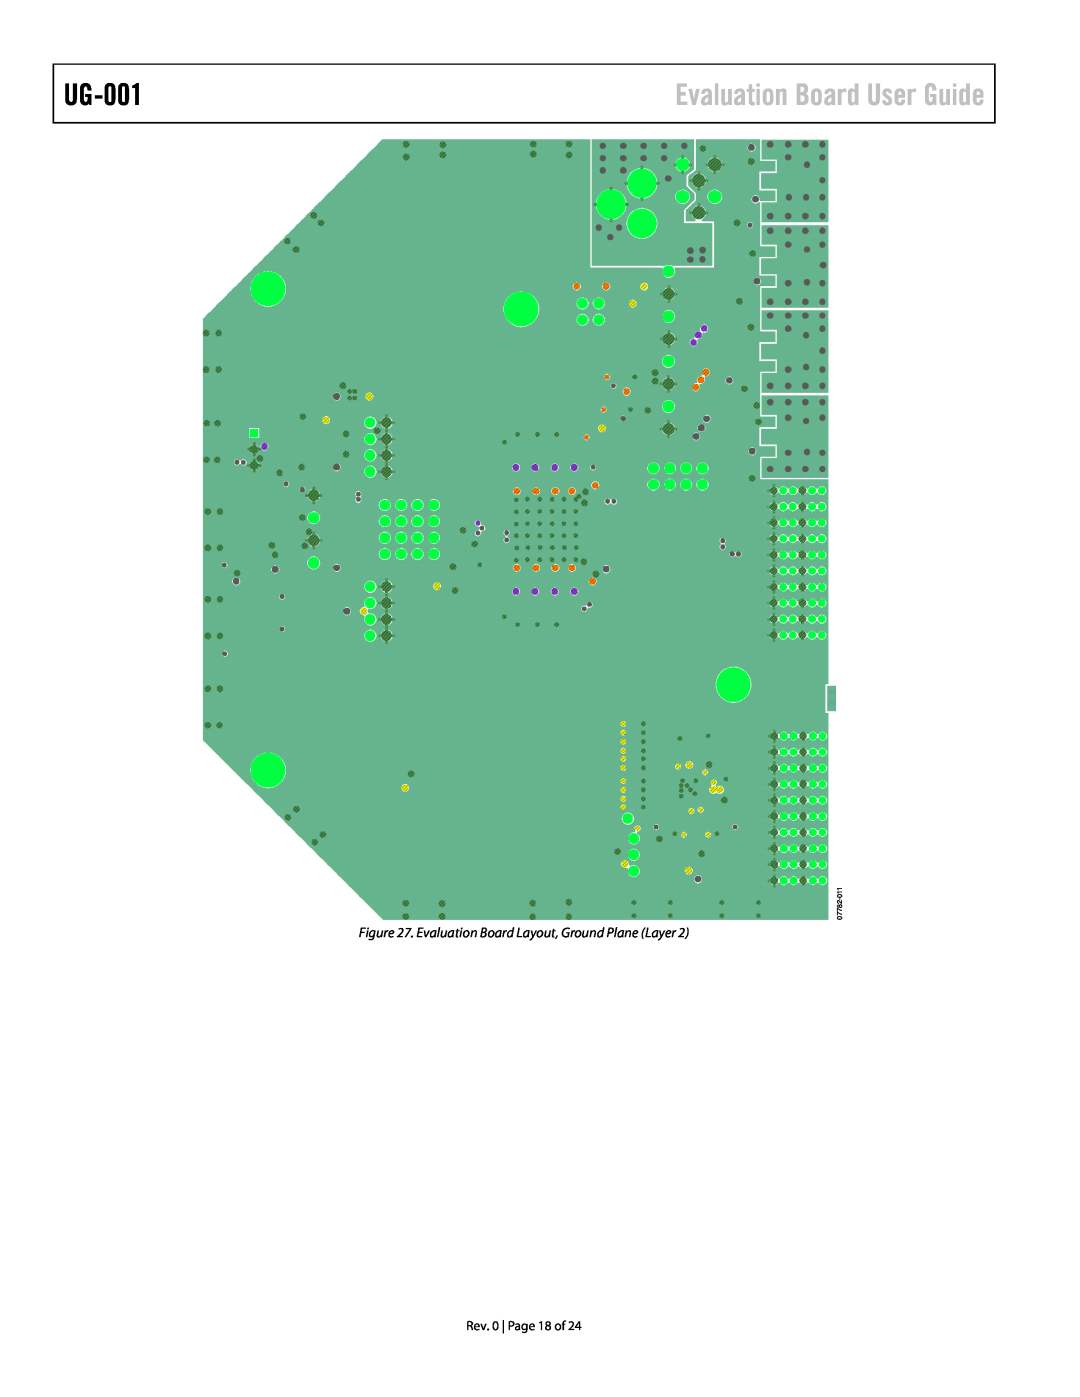 Analog Devices UG-001, AD9273 Evaluation Board User Guide, Evaluation Board Layout, Ground Plane Layer, Rev. 0, 07782-011 